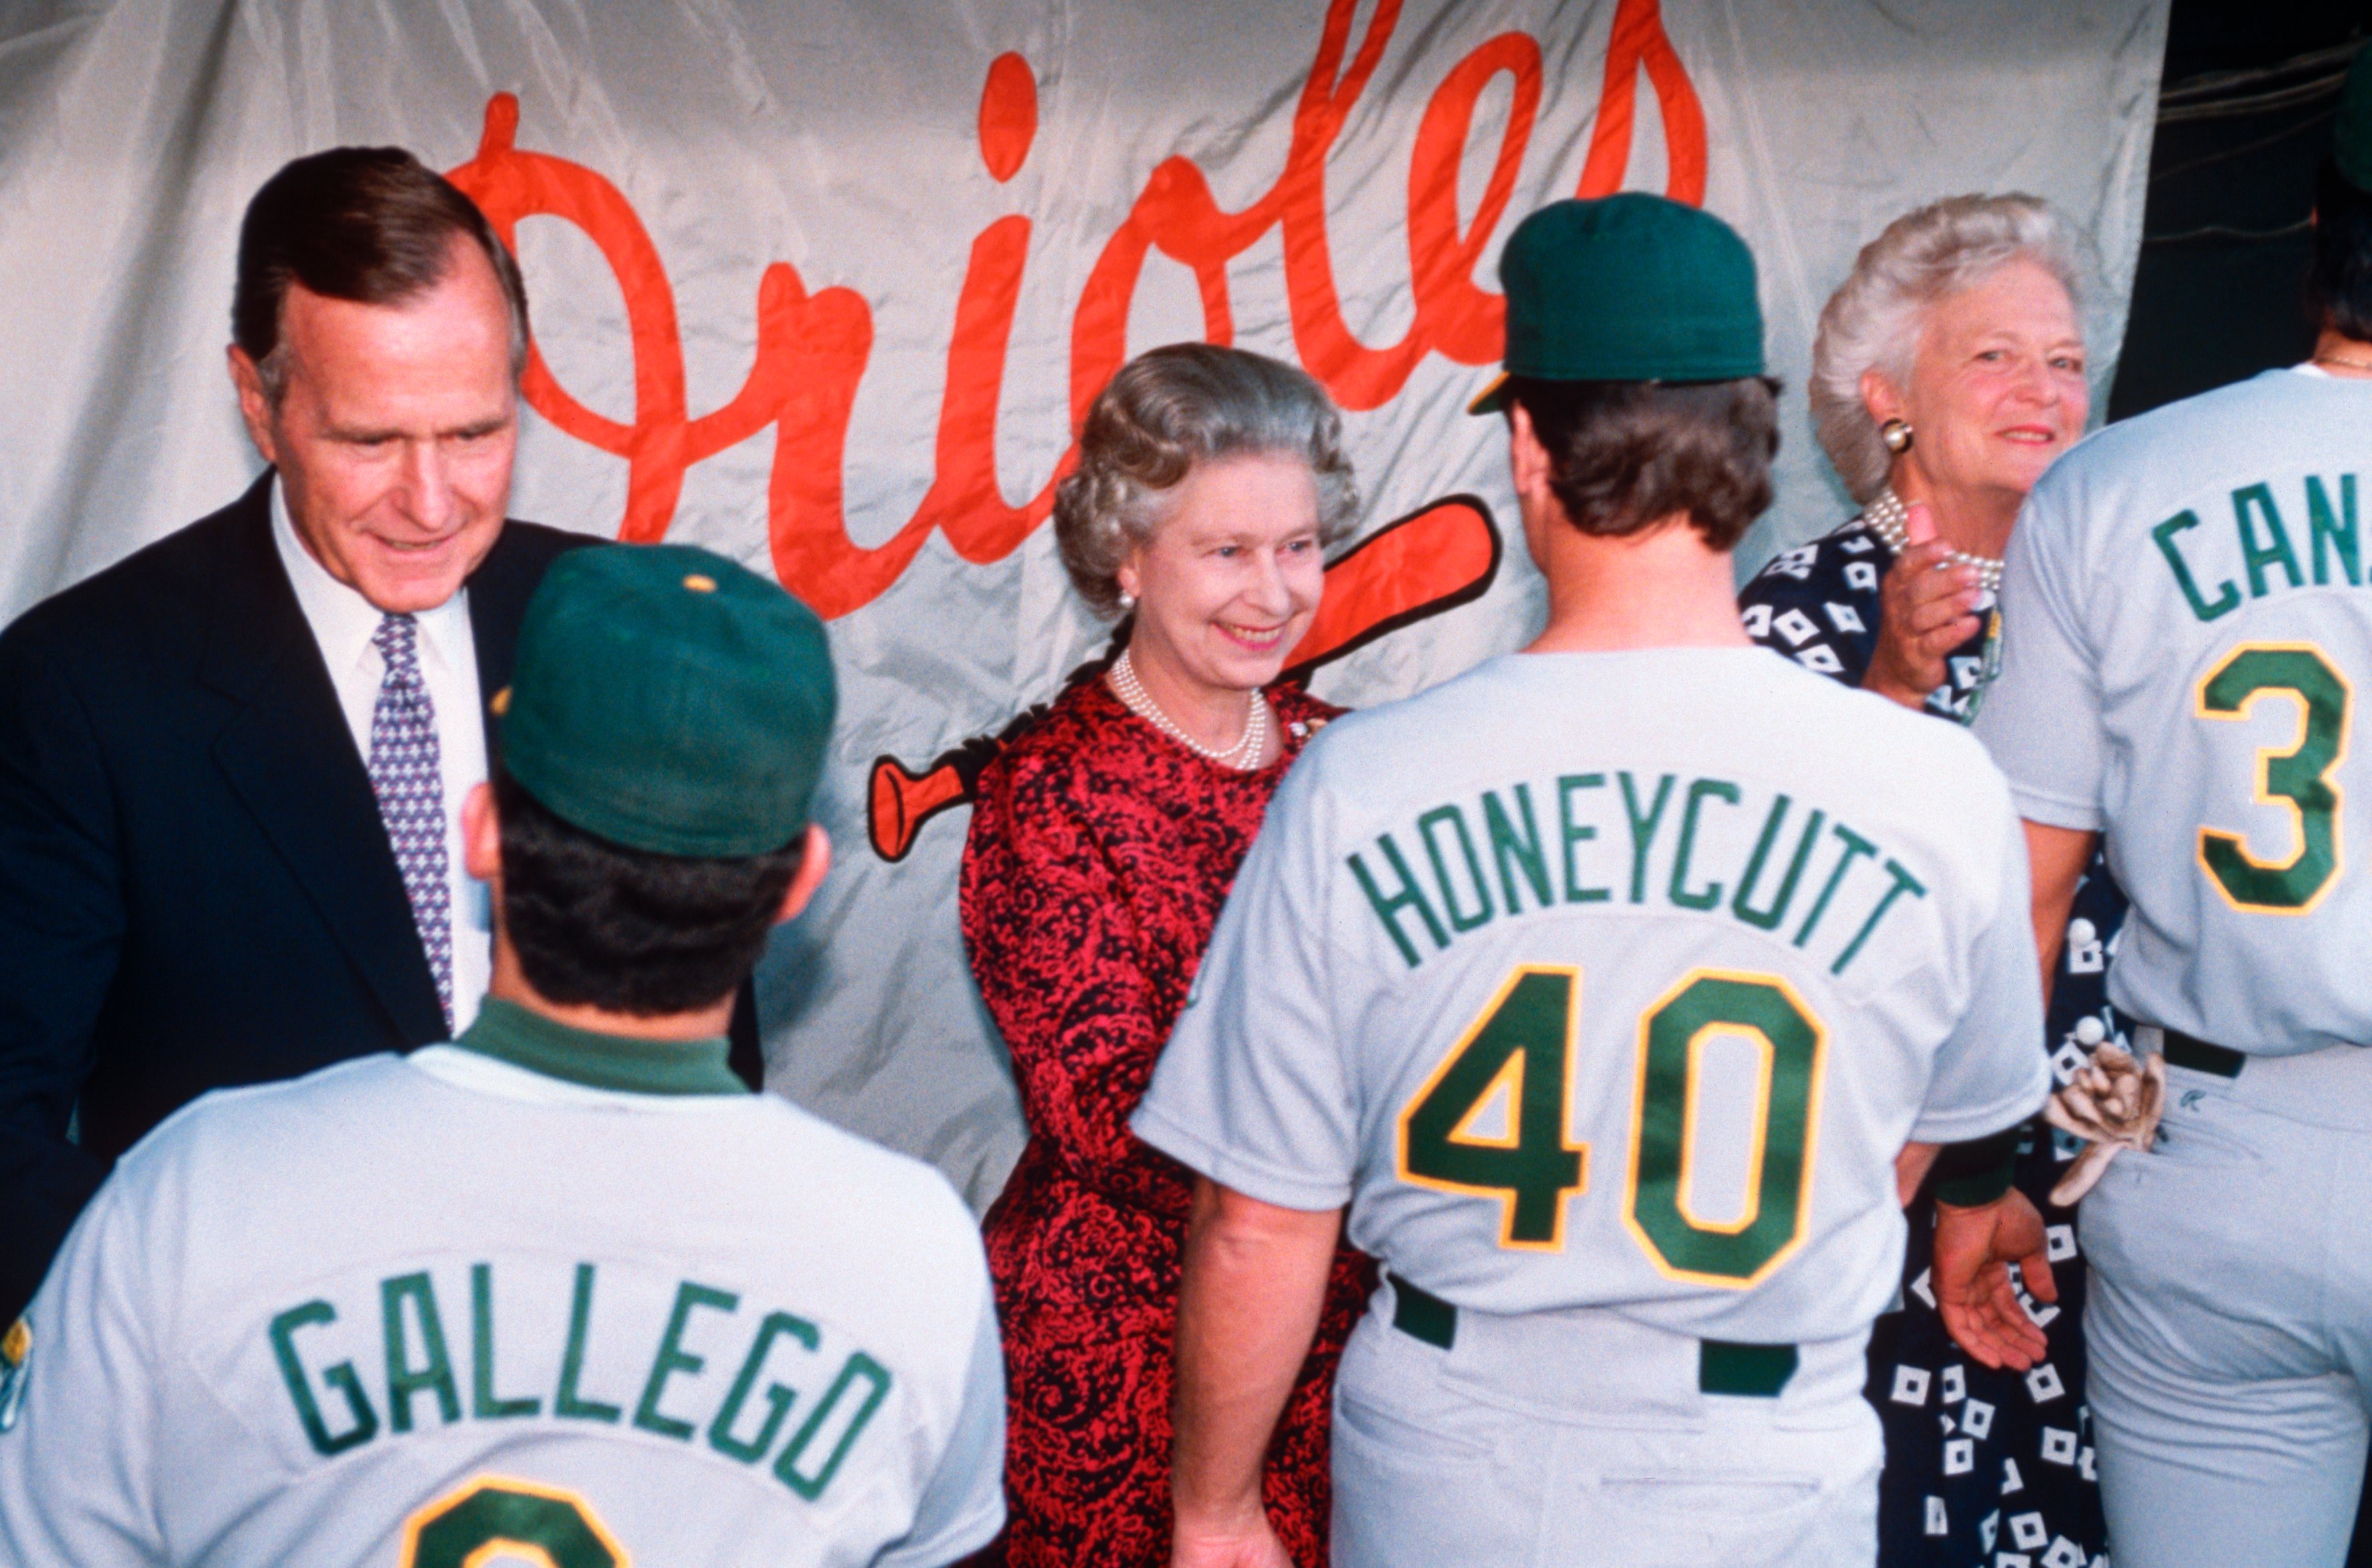 George Bush and Queen Greeting Baseball Players